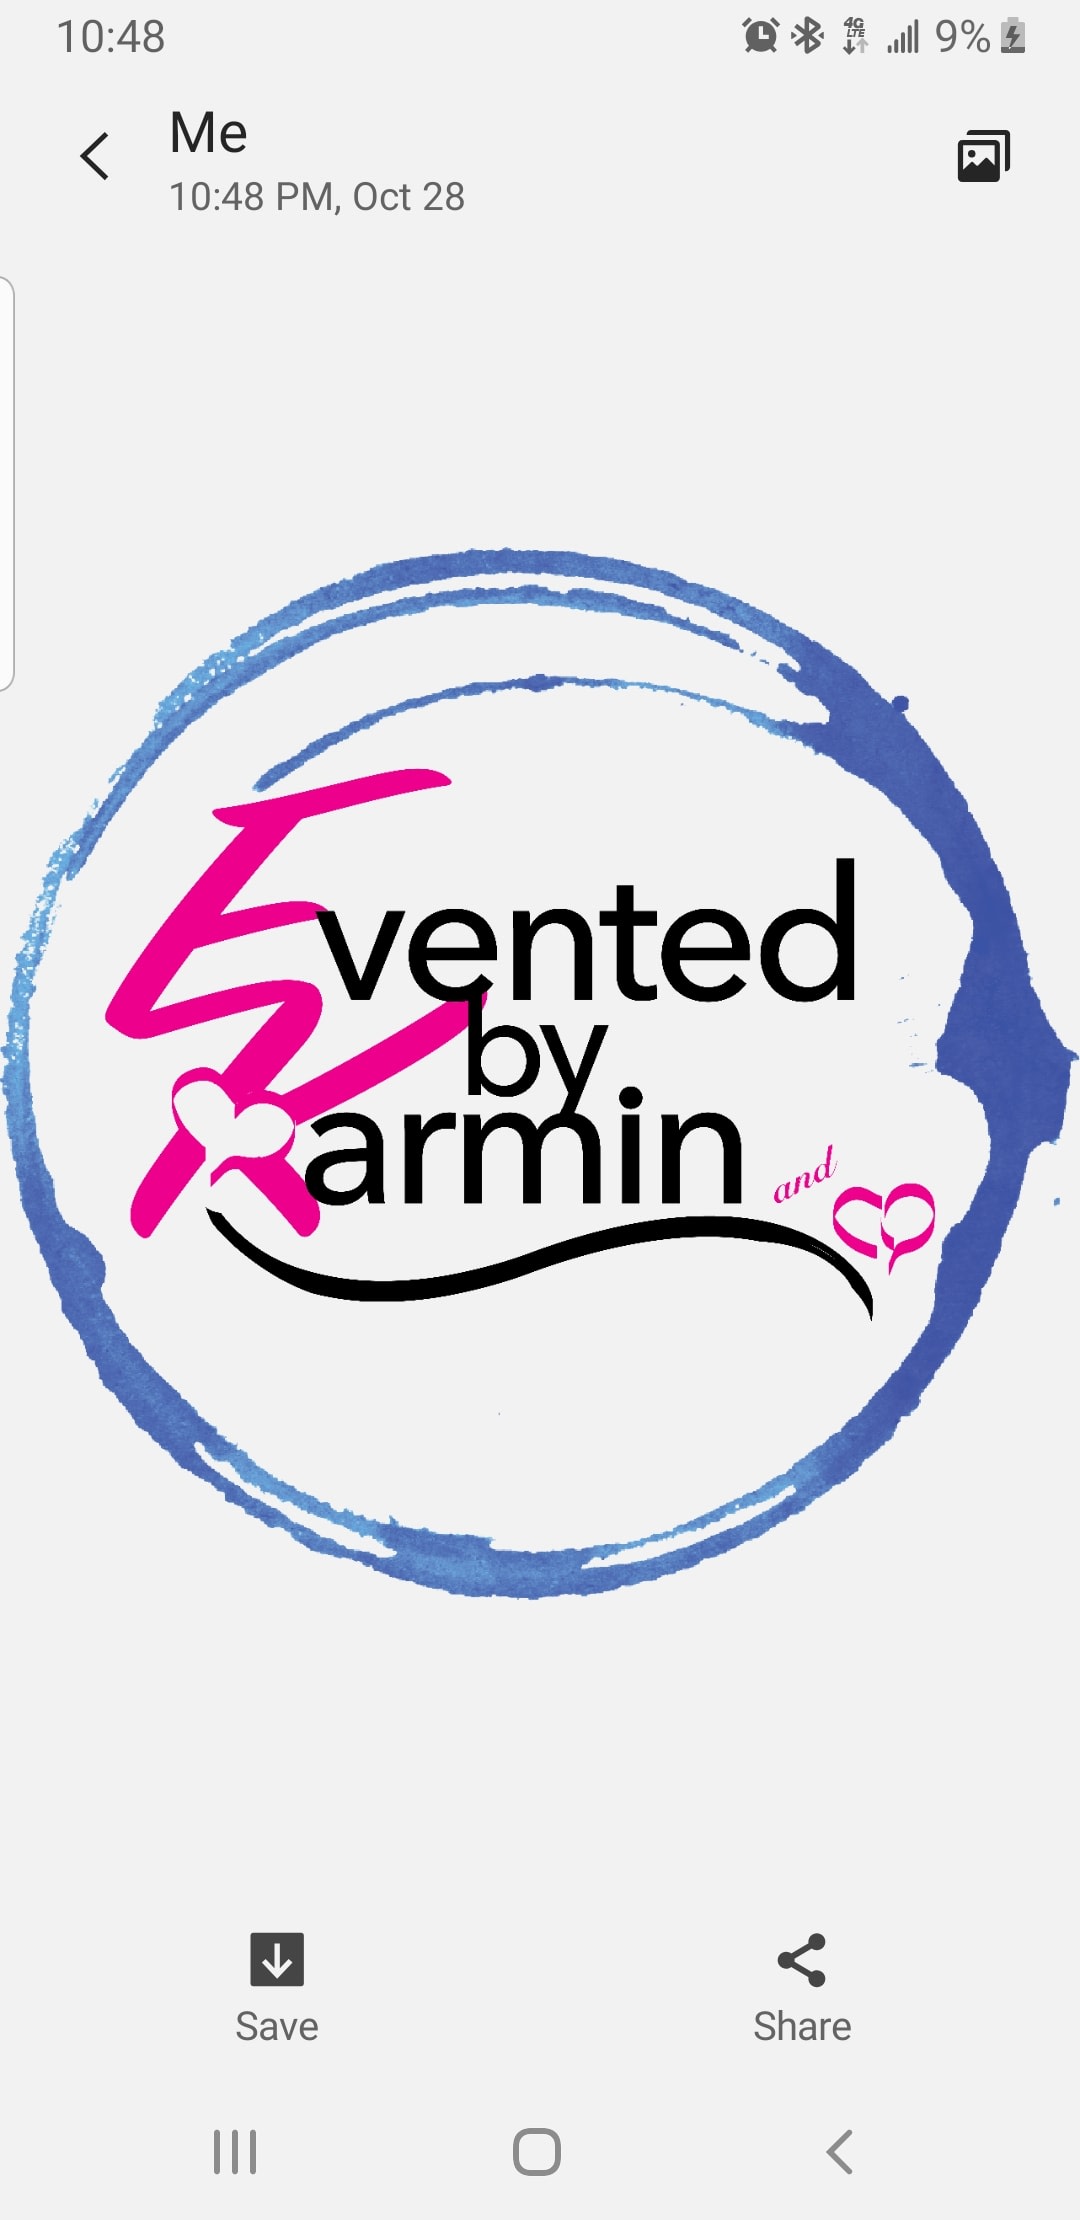 Evented by Karmin & Co